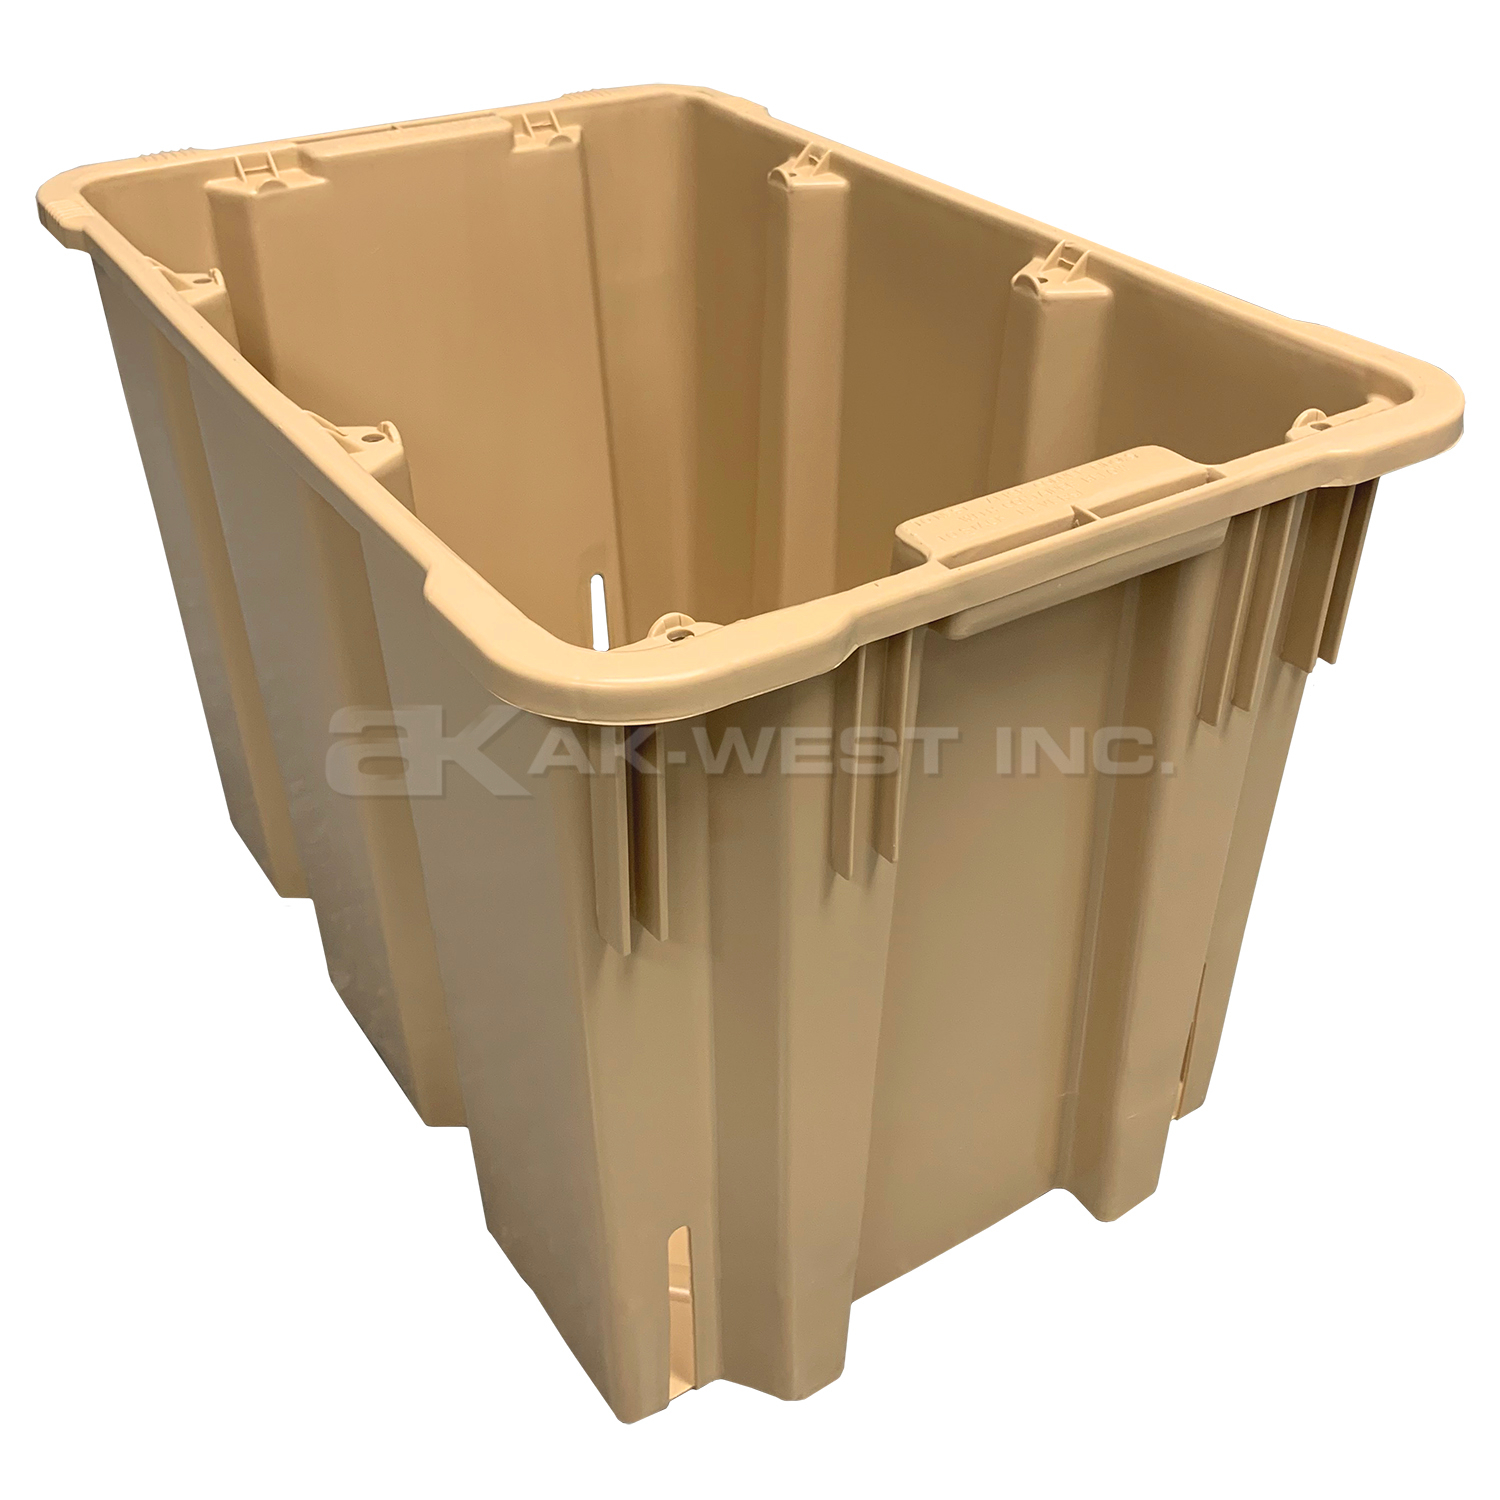 Beige, 22" x 14-1/2" x 14-1/2", Ventilated Bottom Stack and Nest Container